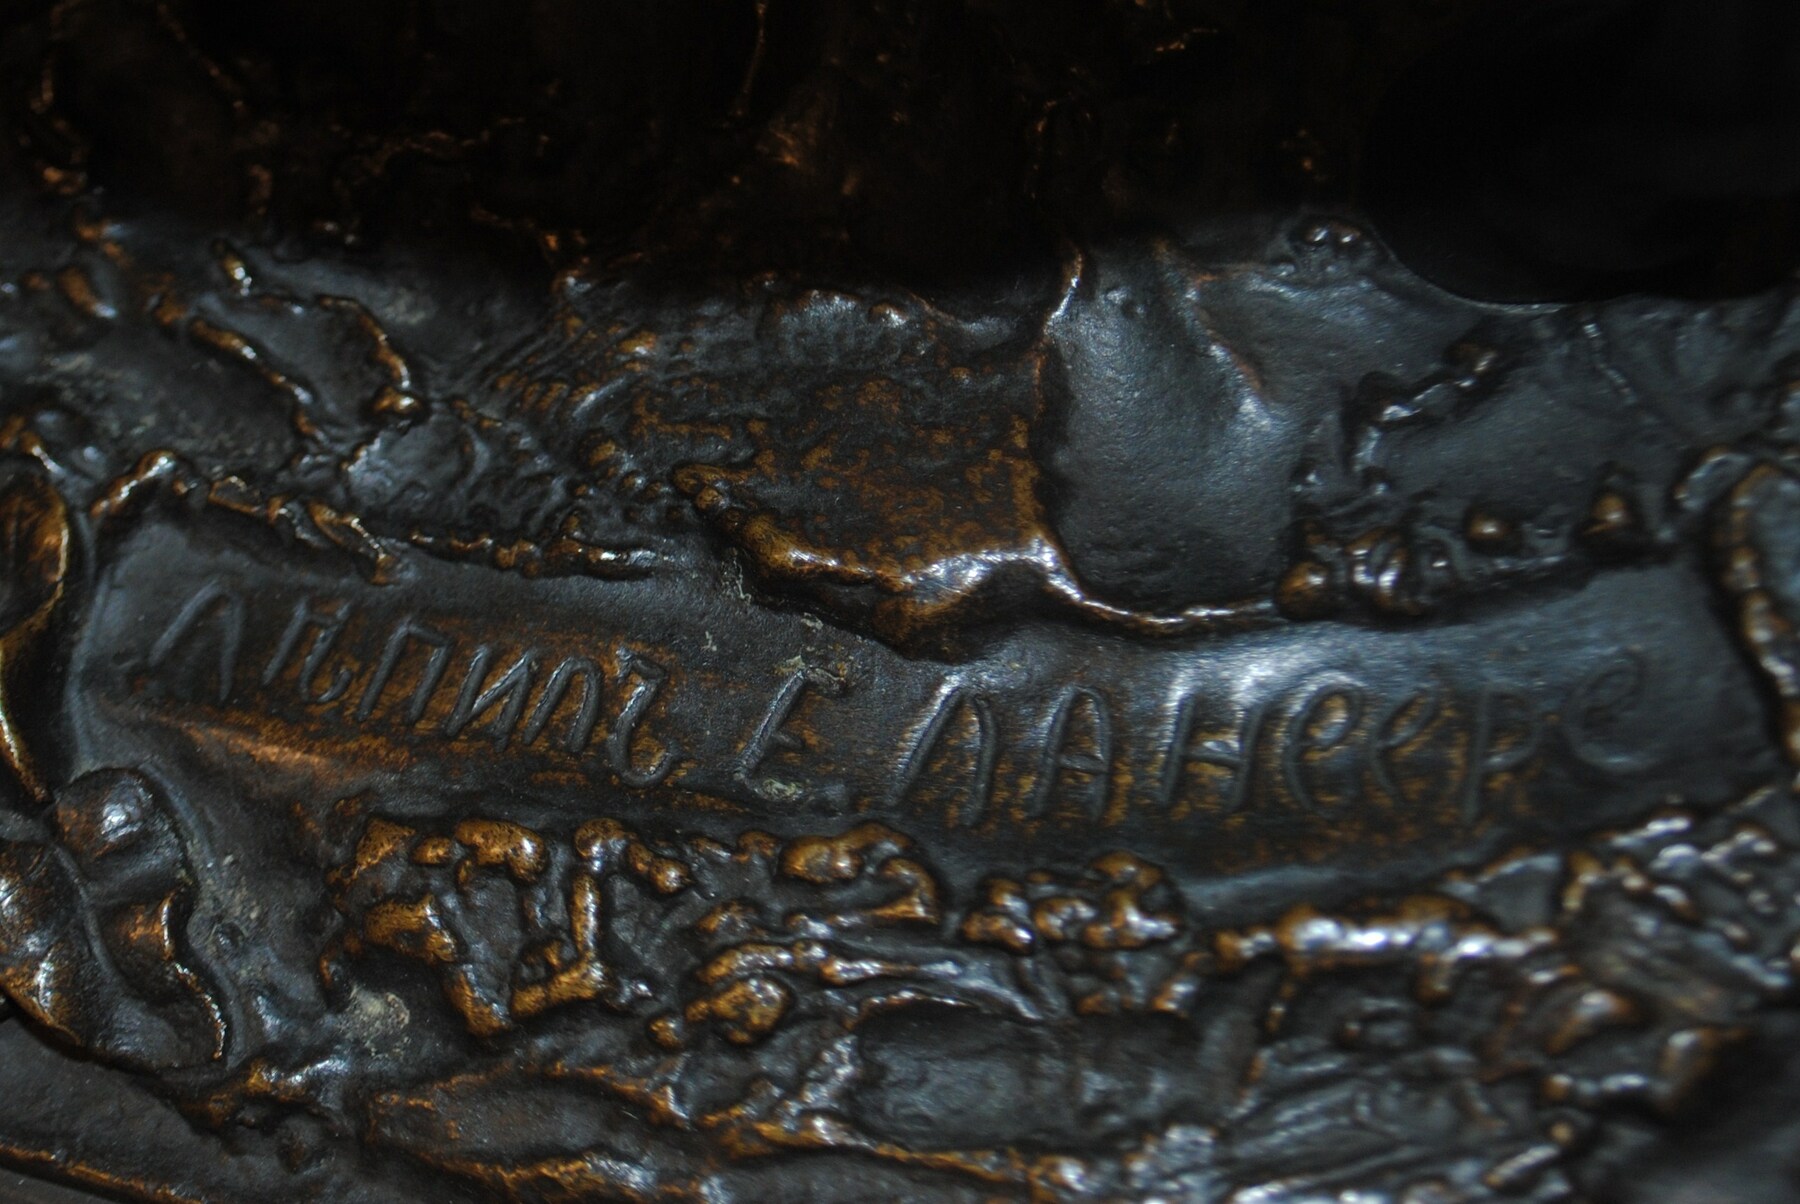 AFTER A MODEL BY EVGENY LANCERAY, INSCRIBED WITH A SIGNATURE IN CYRILLIC, F. CHOPIN FOUNDRY, FINANCE MINISTRY STAMP